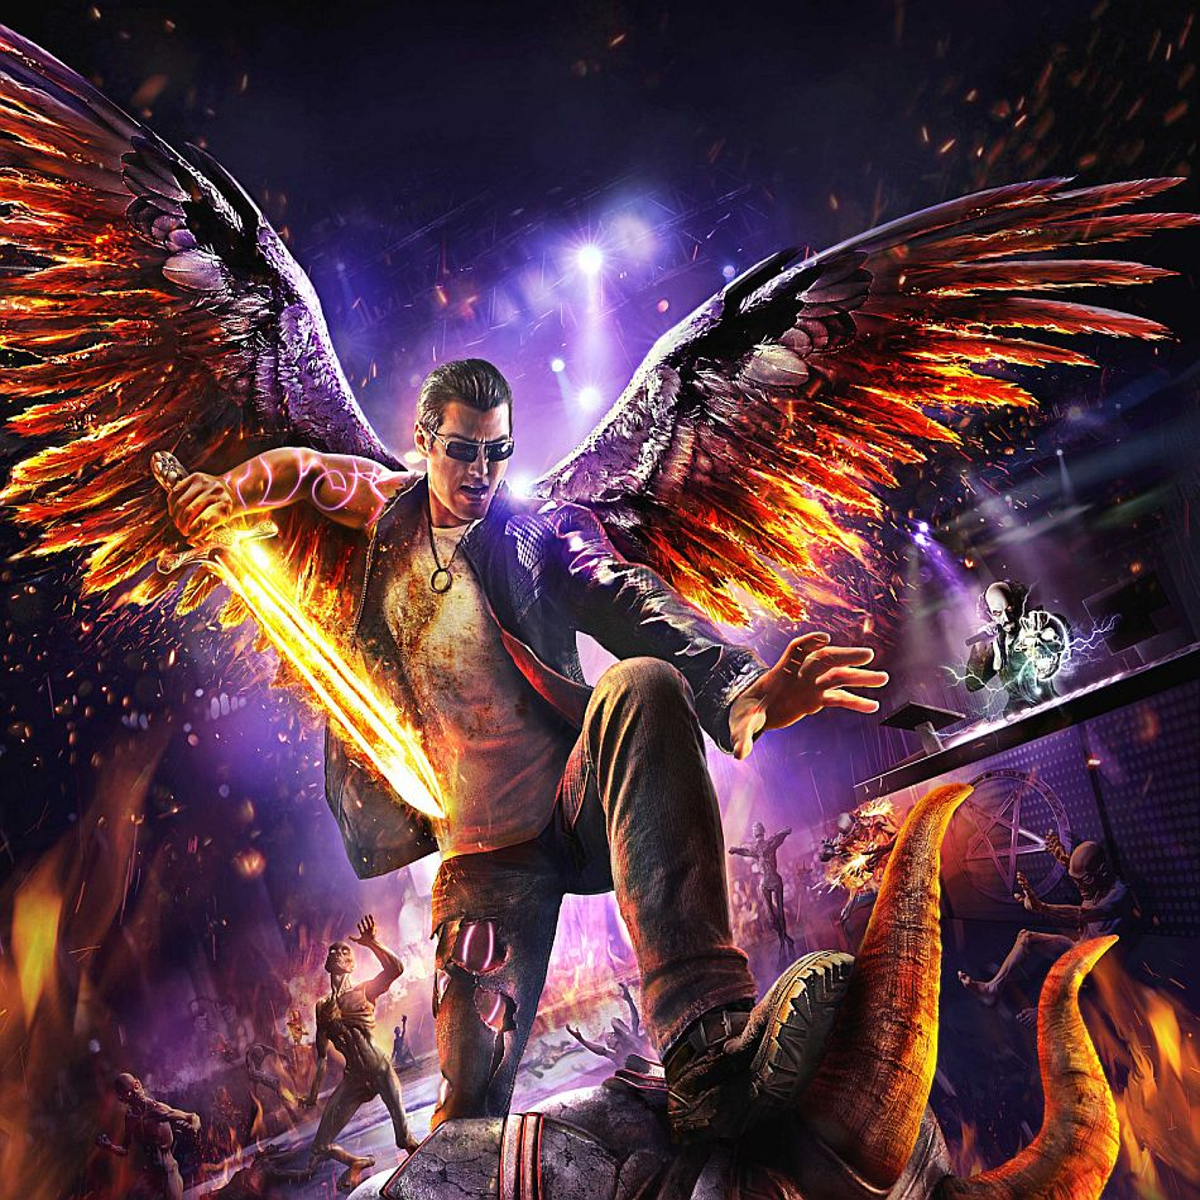 Saints Row: Gat Out Of Hell XBOX One [Digital Code] 